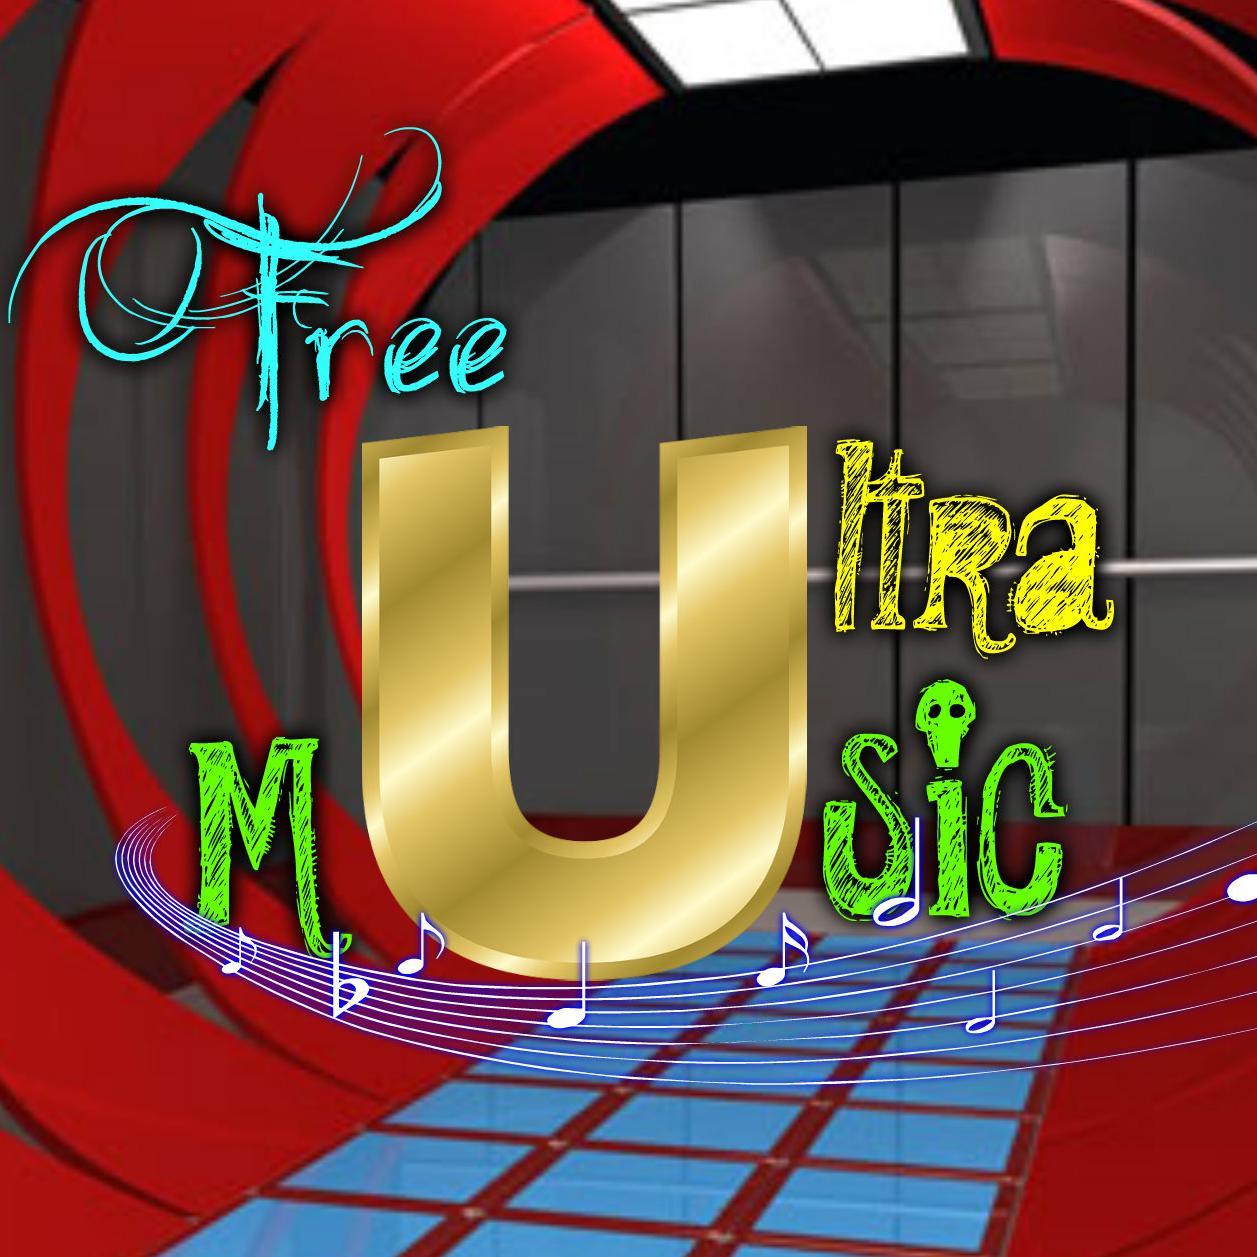 We offer free copyright music! All songs works for monetization on YouTube/ Ofrecemos música sin copyright!
Todas las canciones pueden monetizarse en YouTube/